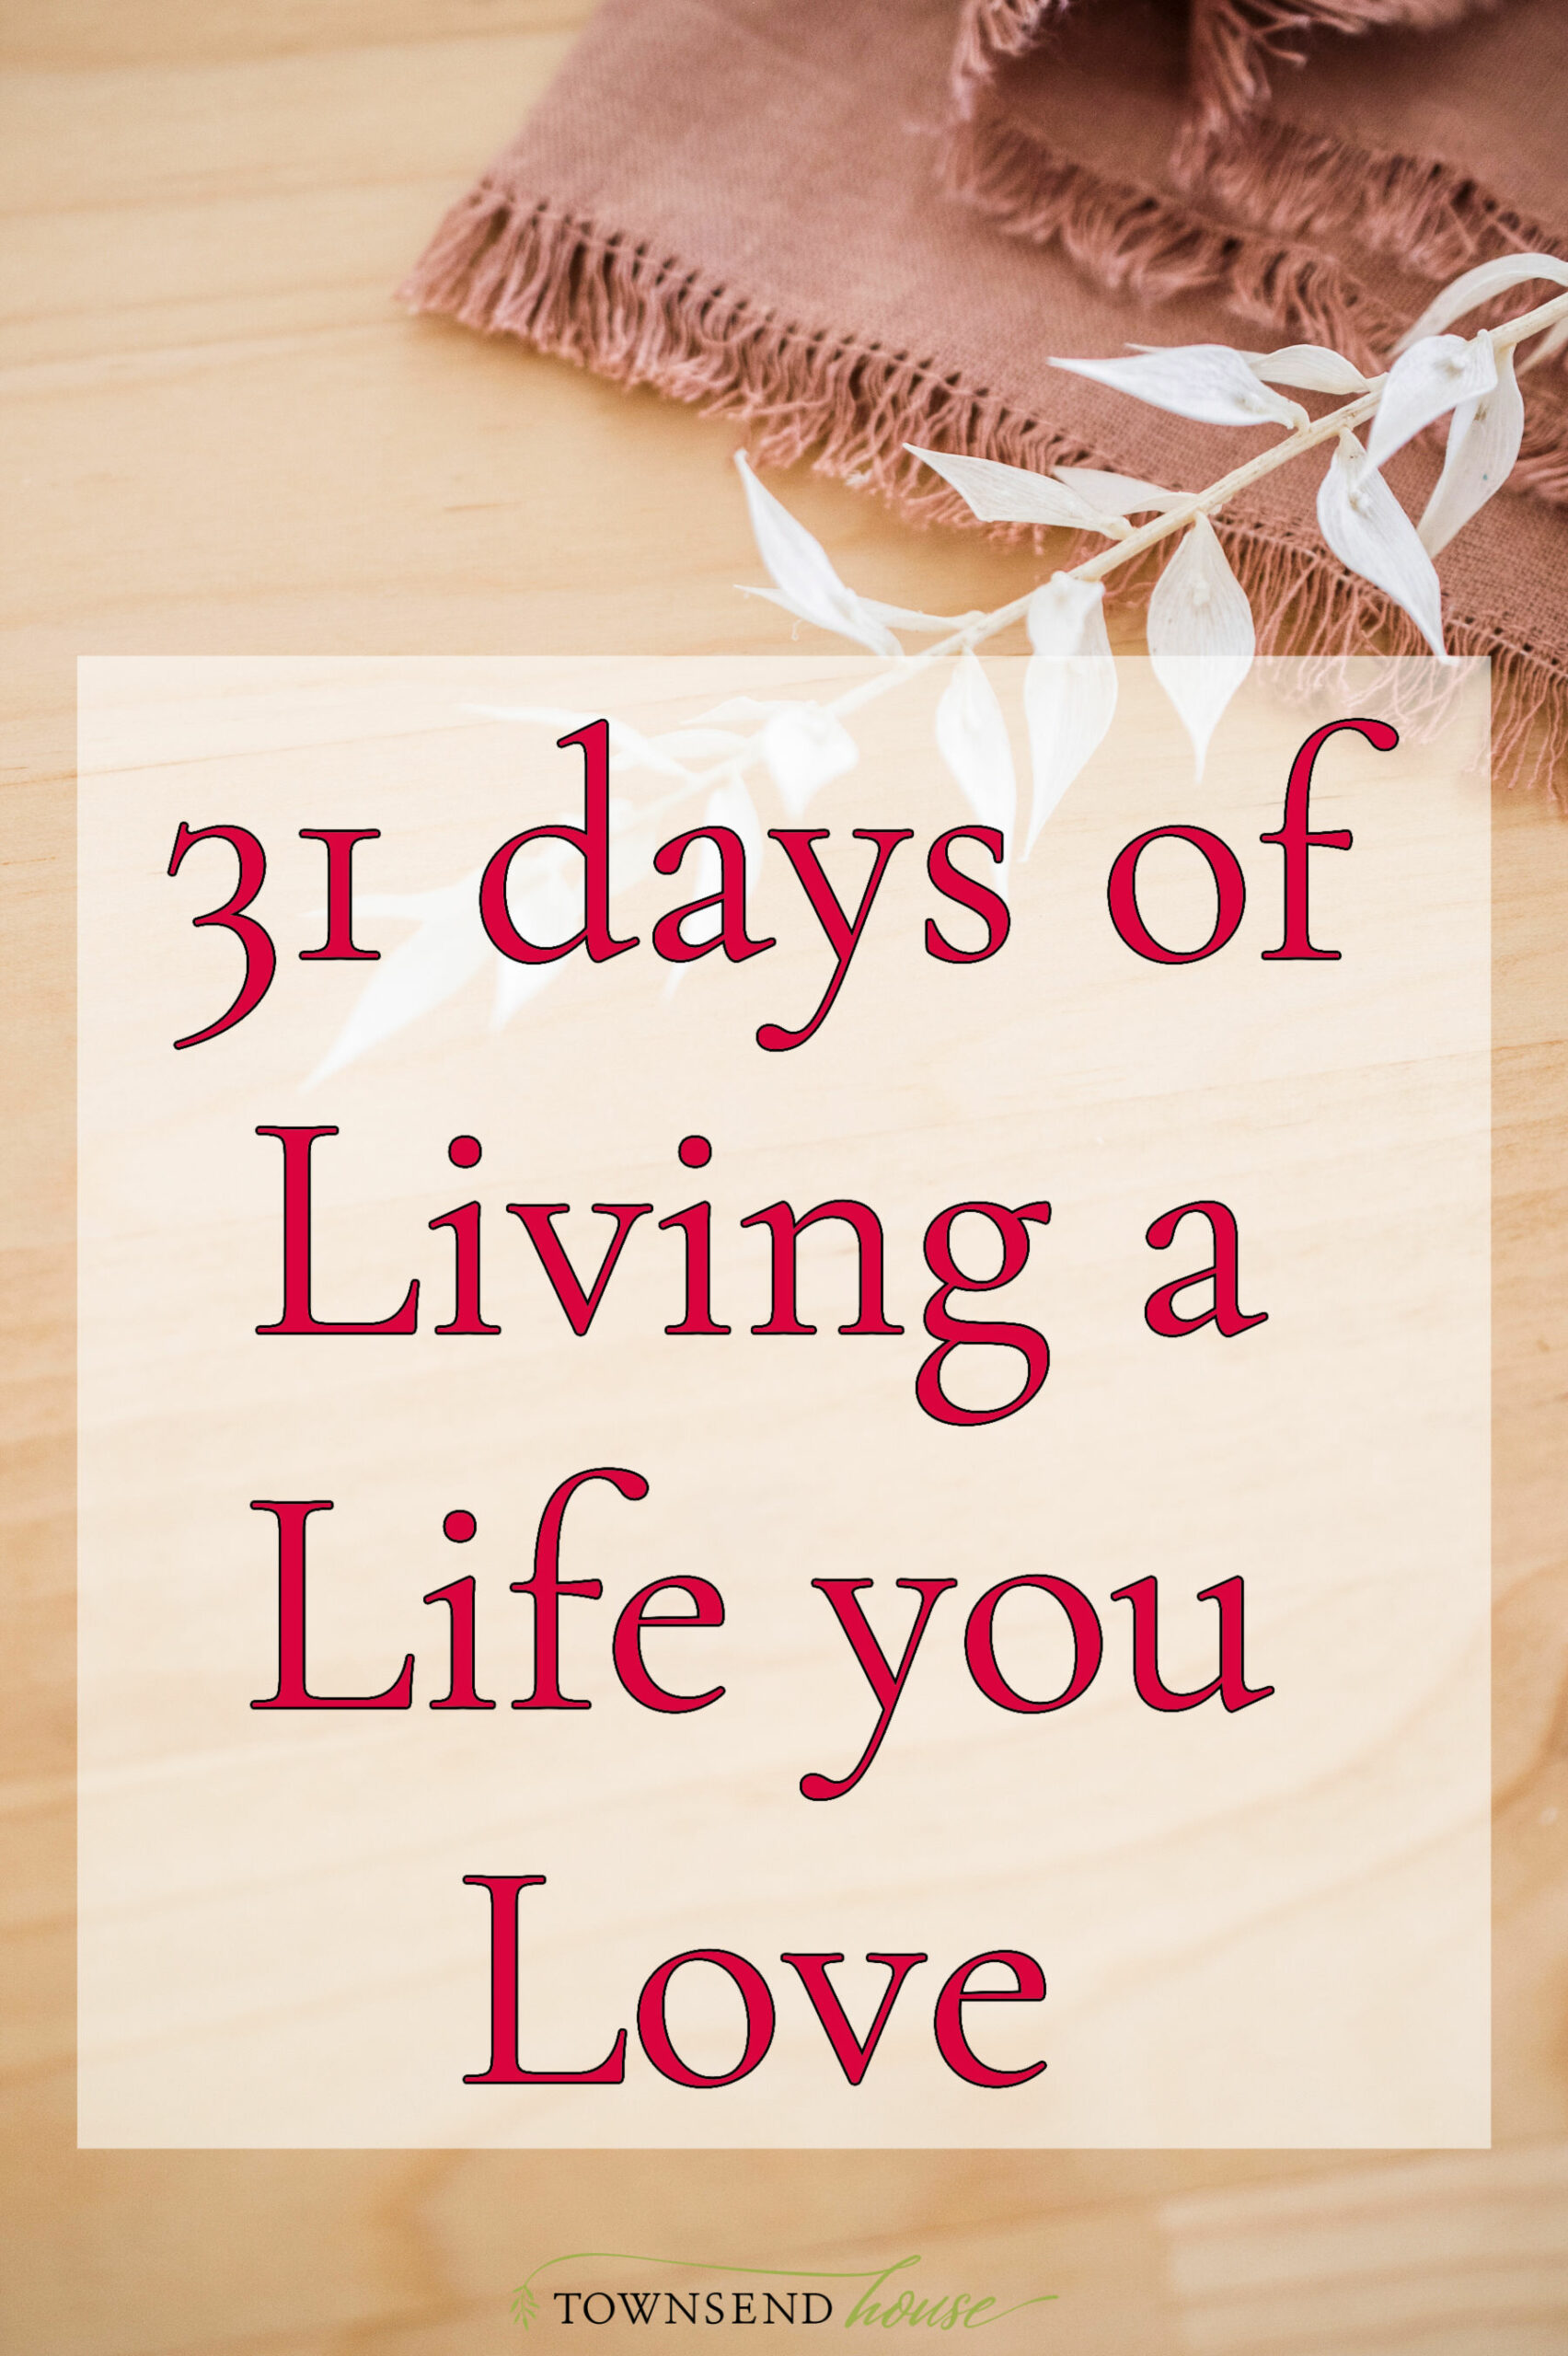 31 Days of Living a Life you Love